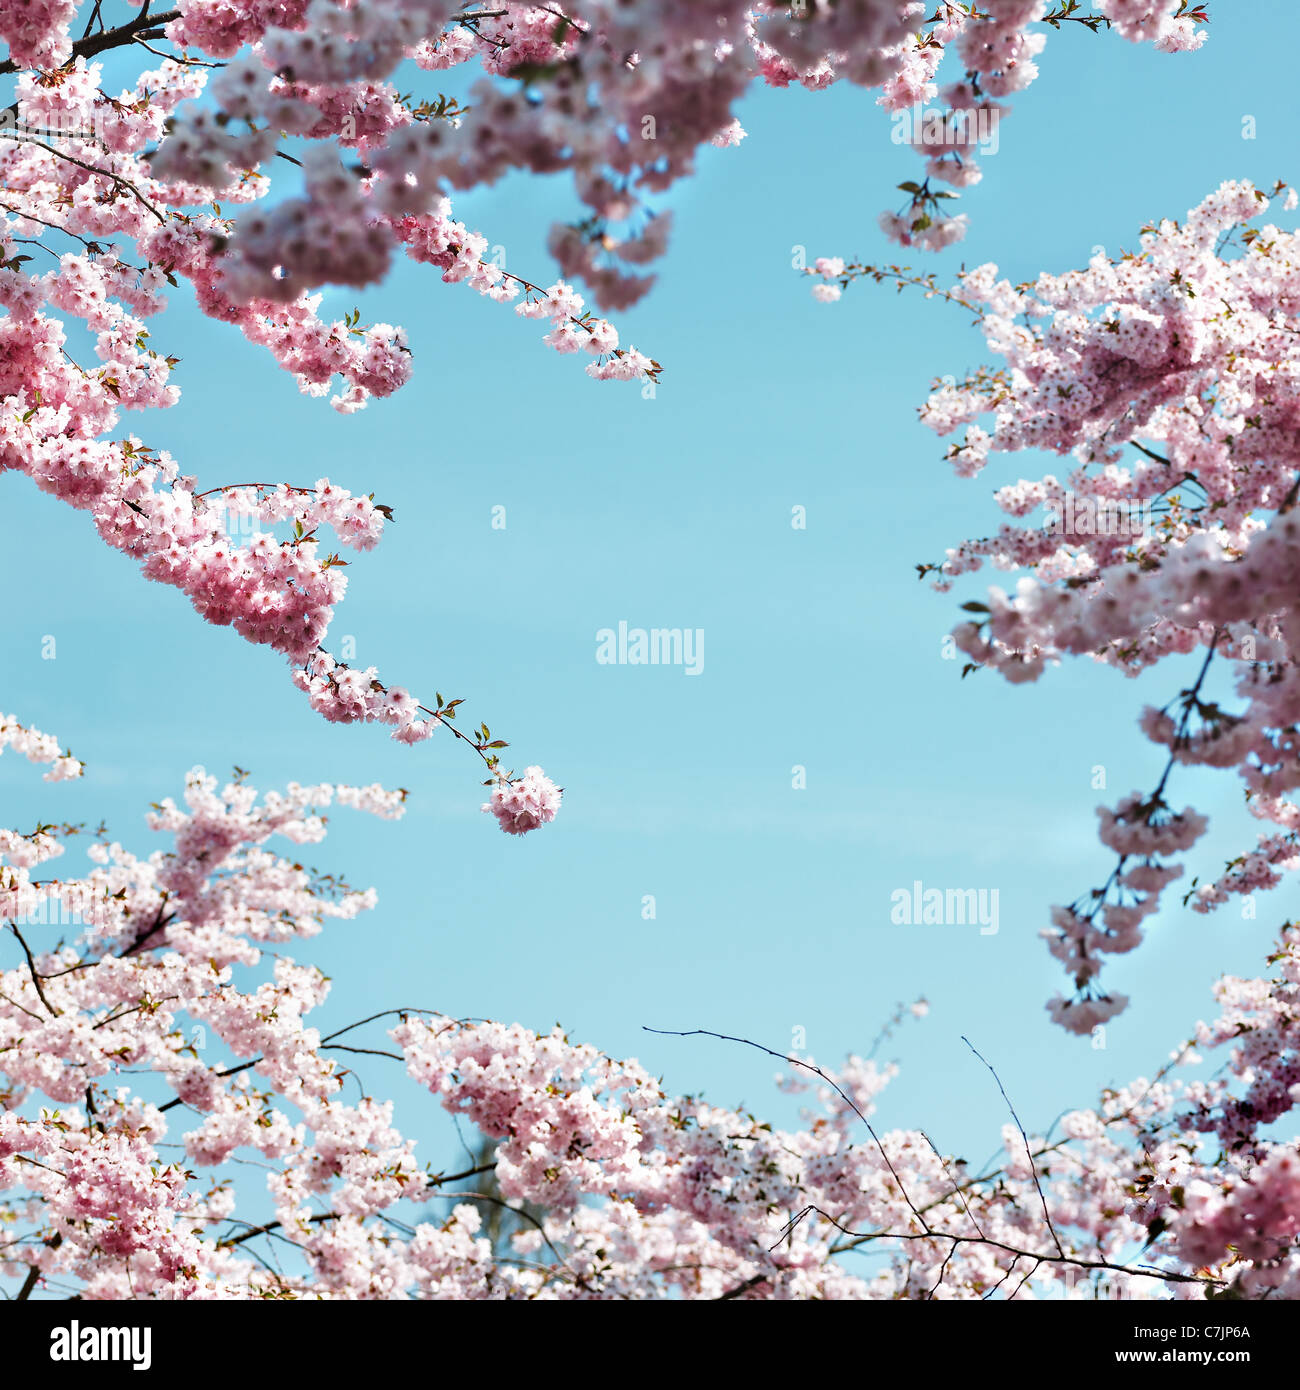 Pink cherry blossoms against blue sky Stock Photo